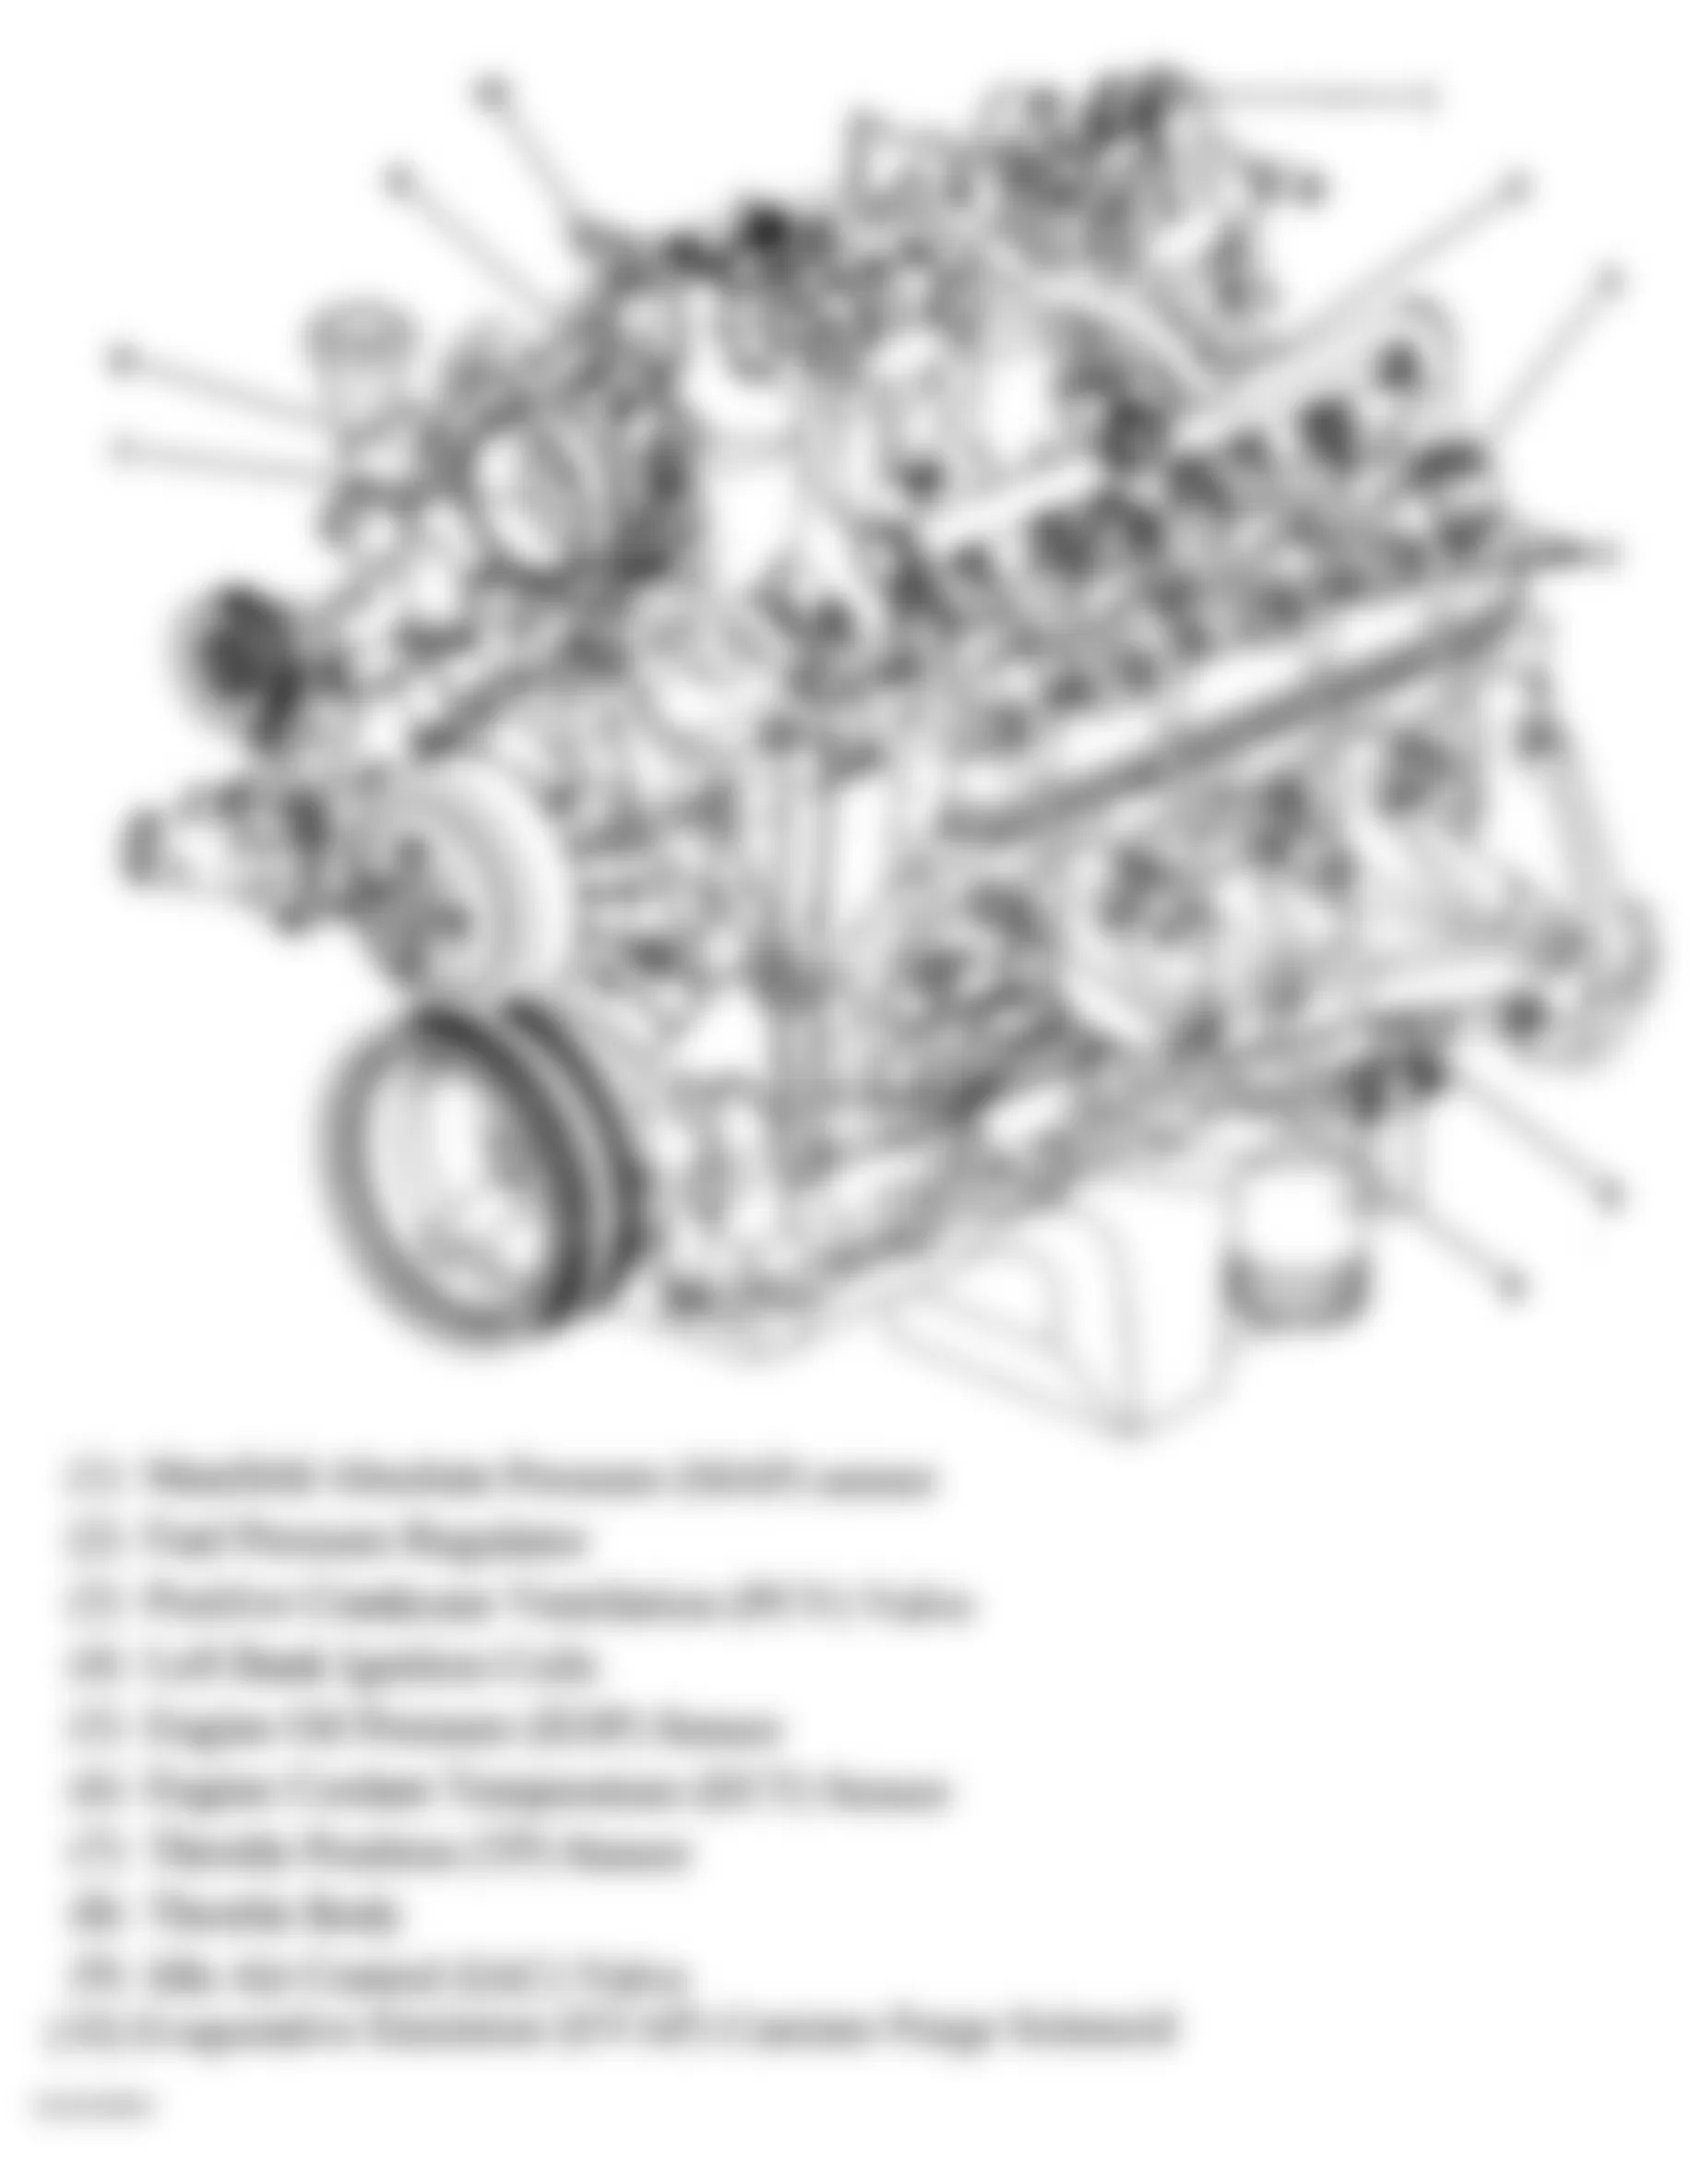 GMC Sierra 1500 2005 - Component Locations -  Left Front Of Engine (4.8L, 5.3L & 6.0L)